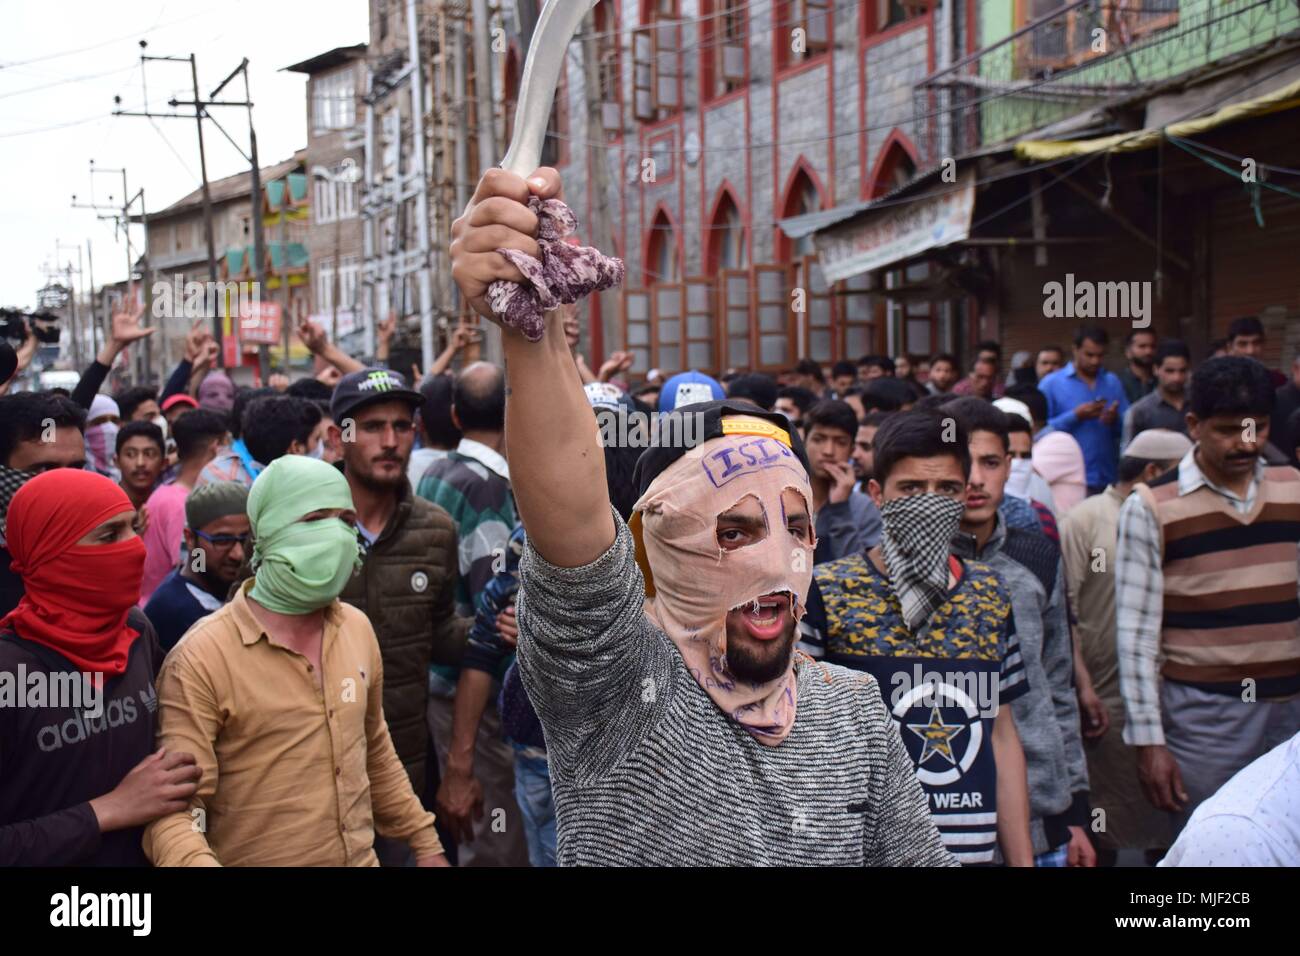 Srinagar, Jammu & Kashmir, India, May 5, 2018.  People shouting anti indian slogans during multiple funerals held in Indian Kashmir. Multiple Funeral processions held in srinagar summer capital of Indian Kashmir on Saturday of Fayaz Ahmed Hamal a LeT (Lashkar-e-Taiba) Militant and a Civilian Adil Ahmed Yatoo who were killed by armoured vehicle on Saturday during clashes near Encounter site. in an encounter between Indian forces and mi Credit: ZUMA Press, Inc./Alamy Live News Stock Photo